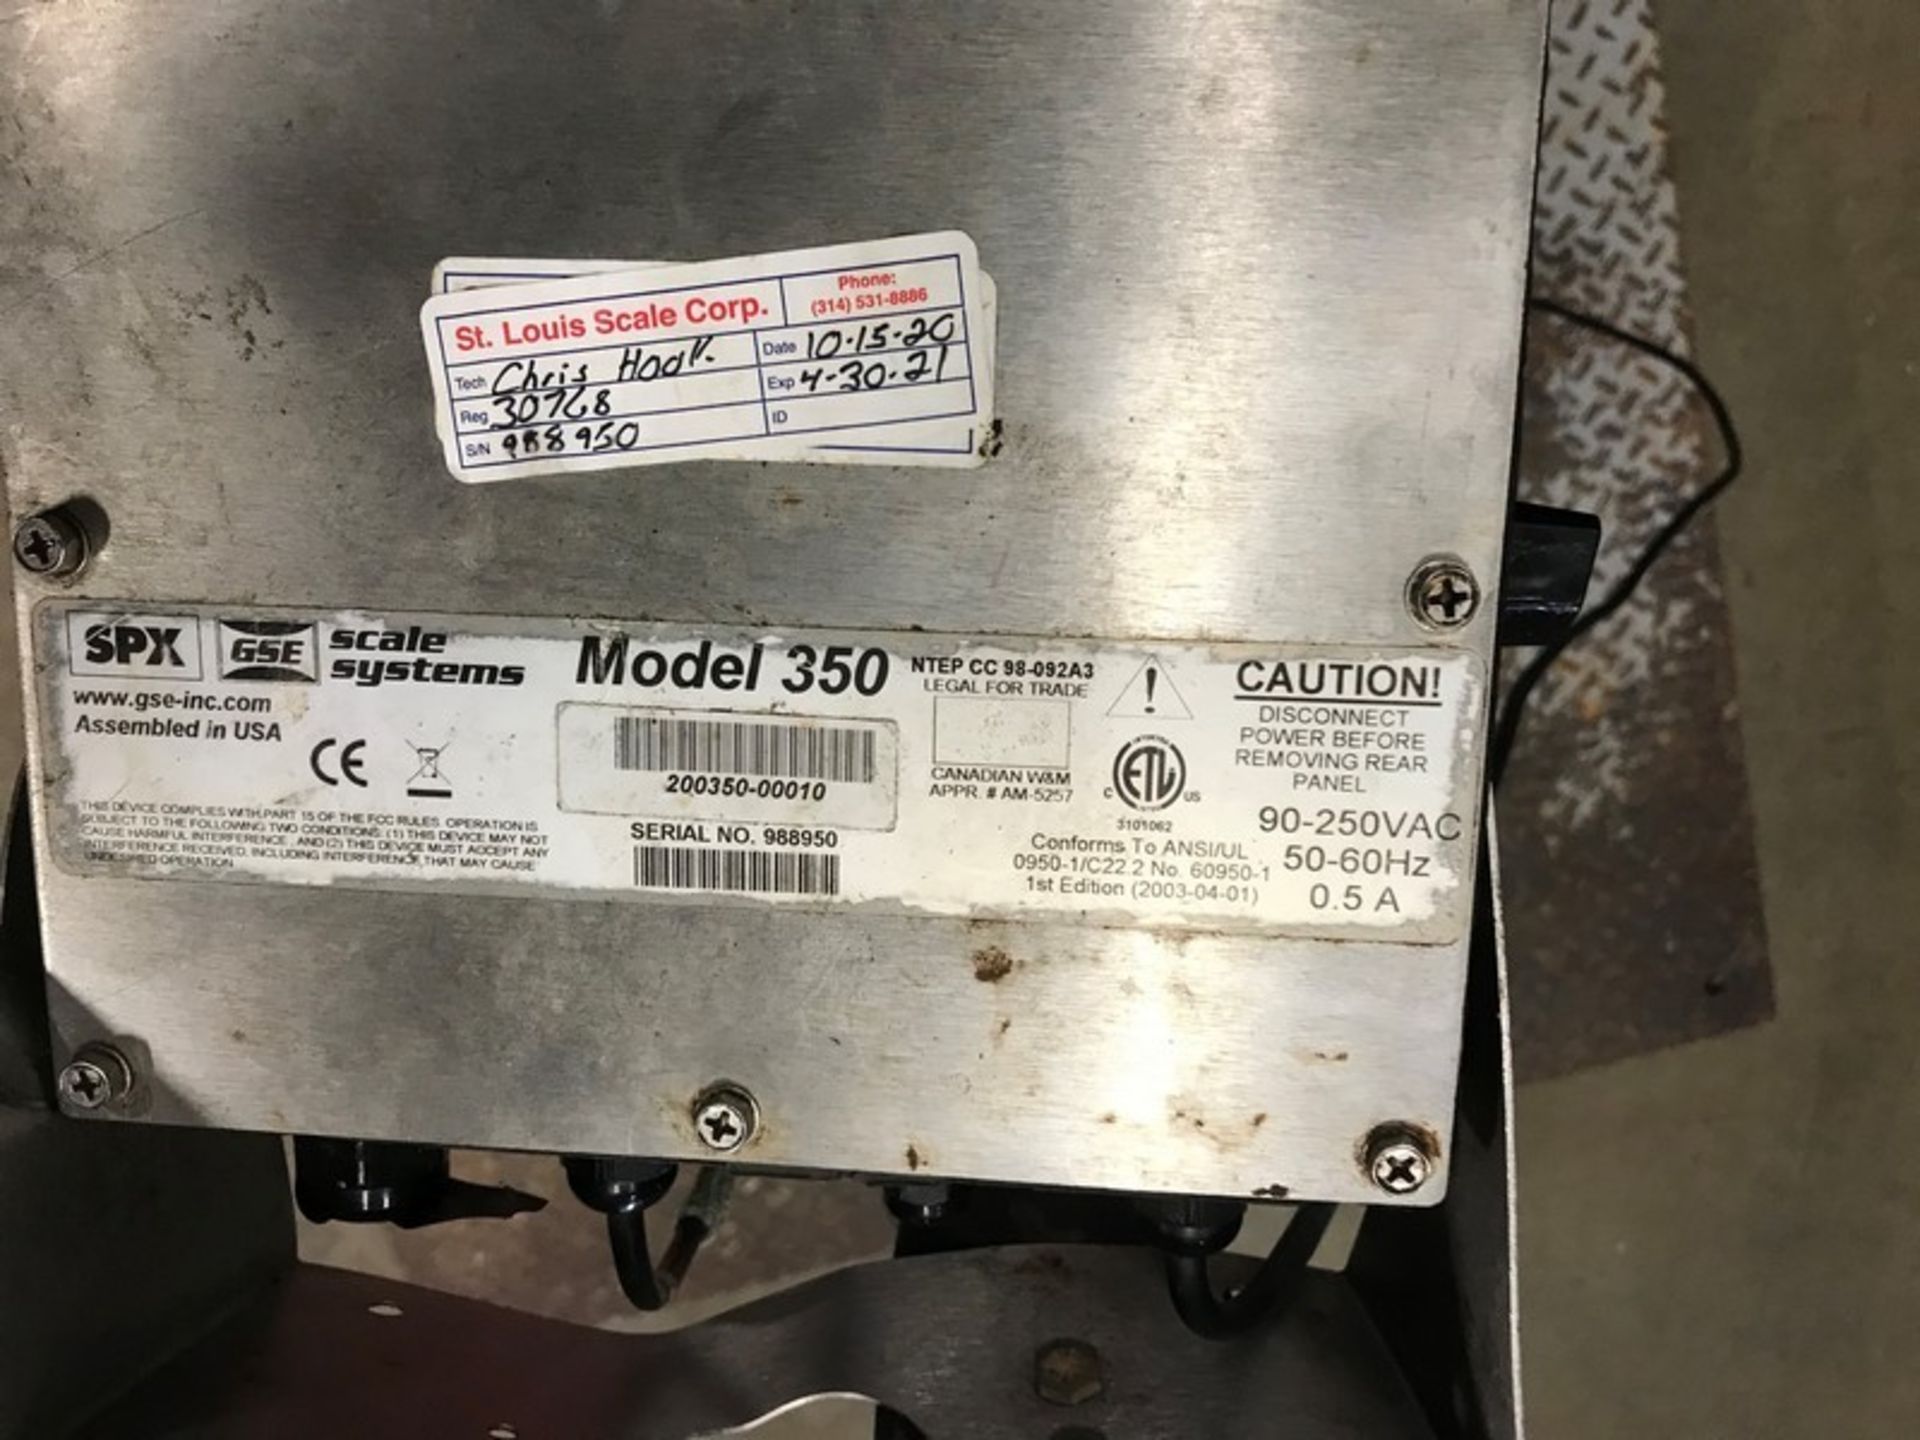 Aprox. 5,000 lb. Capacity Floor Scale with SPX Digital Read-Out, Model 350, S/N 988950 - Image 2 of 2